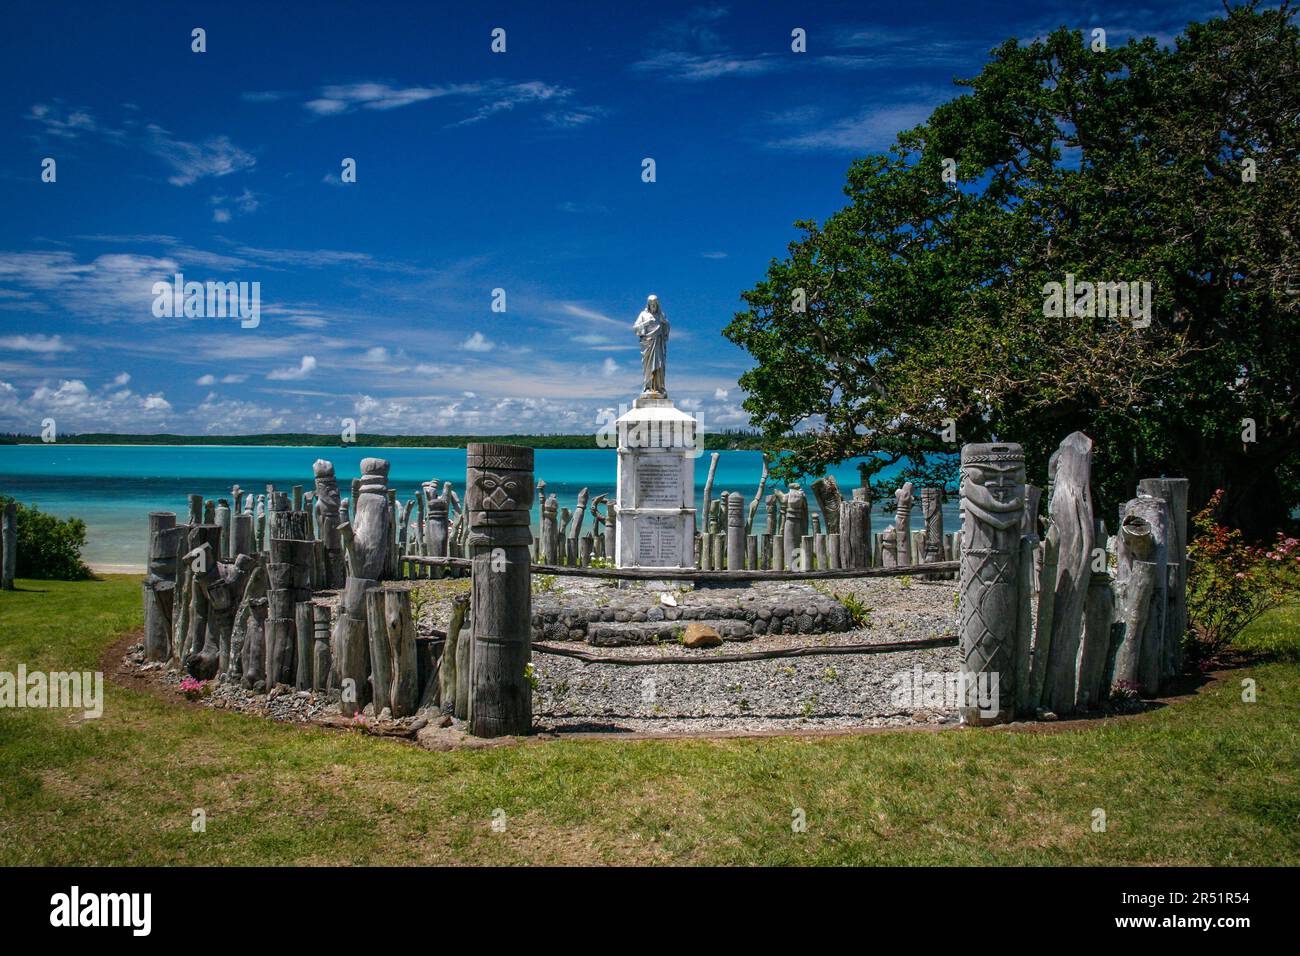 Wooden totems at iles des pins, New Caledonia Stock Photo